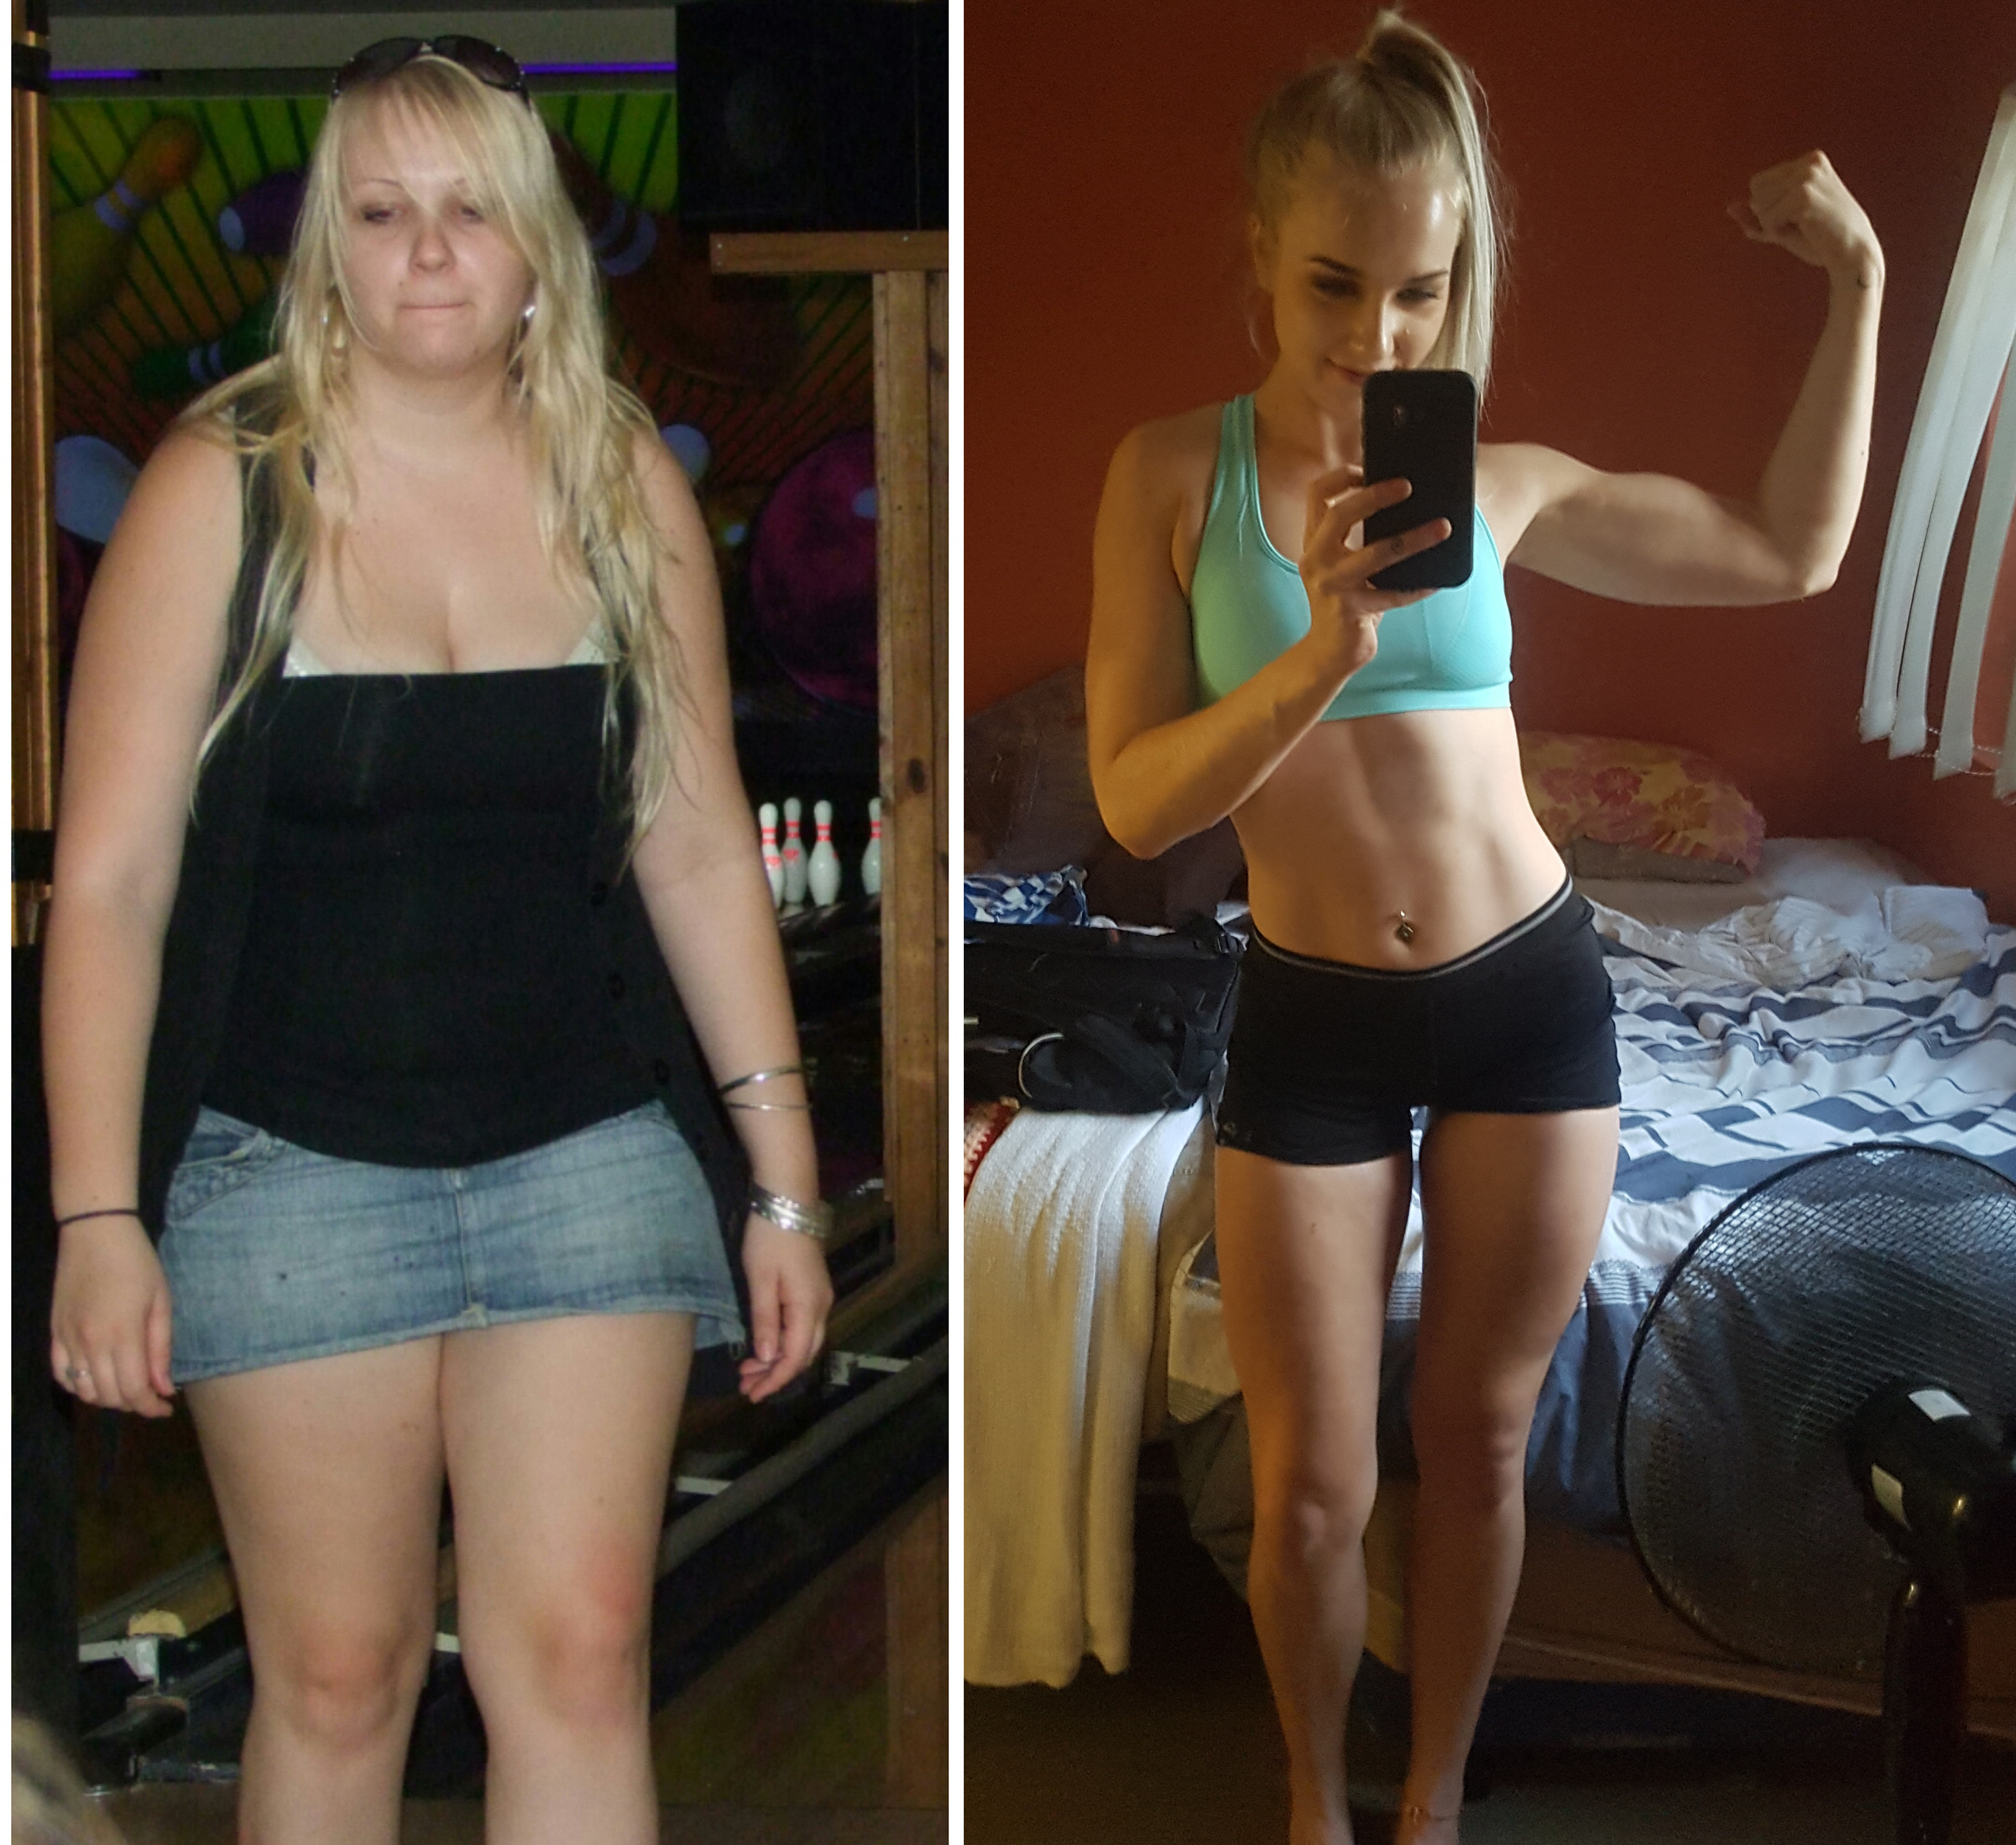 In 2010   she weighed roughly 95 kg (209 lb). The second pic was from a few weeks ago and it's around 72 kg (158 lbs).